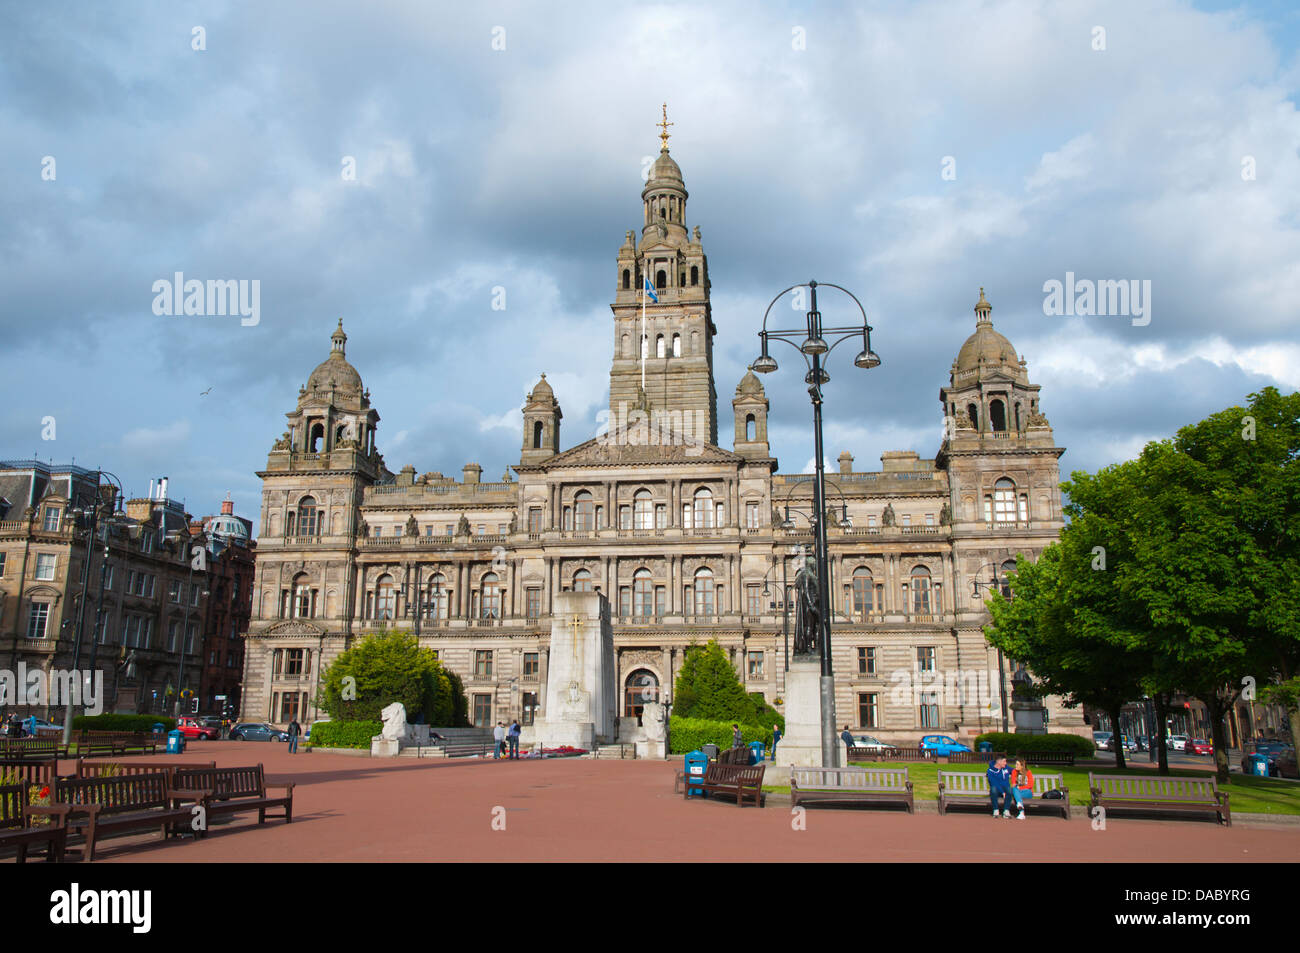 Ère victorienne Glasgow City Chambers town hall (1888) George Square Central Glasgow Ecosse Grande-Bretagne Angleterre Europe Banque D'Images